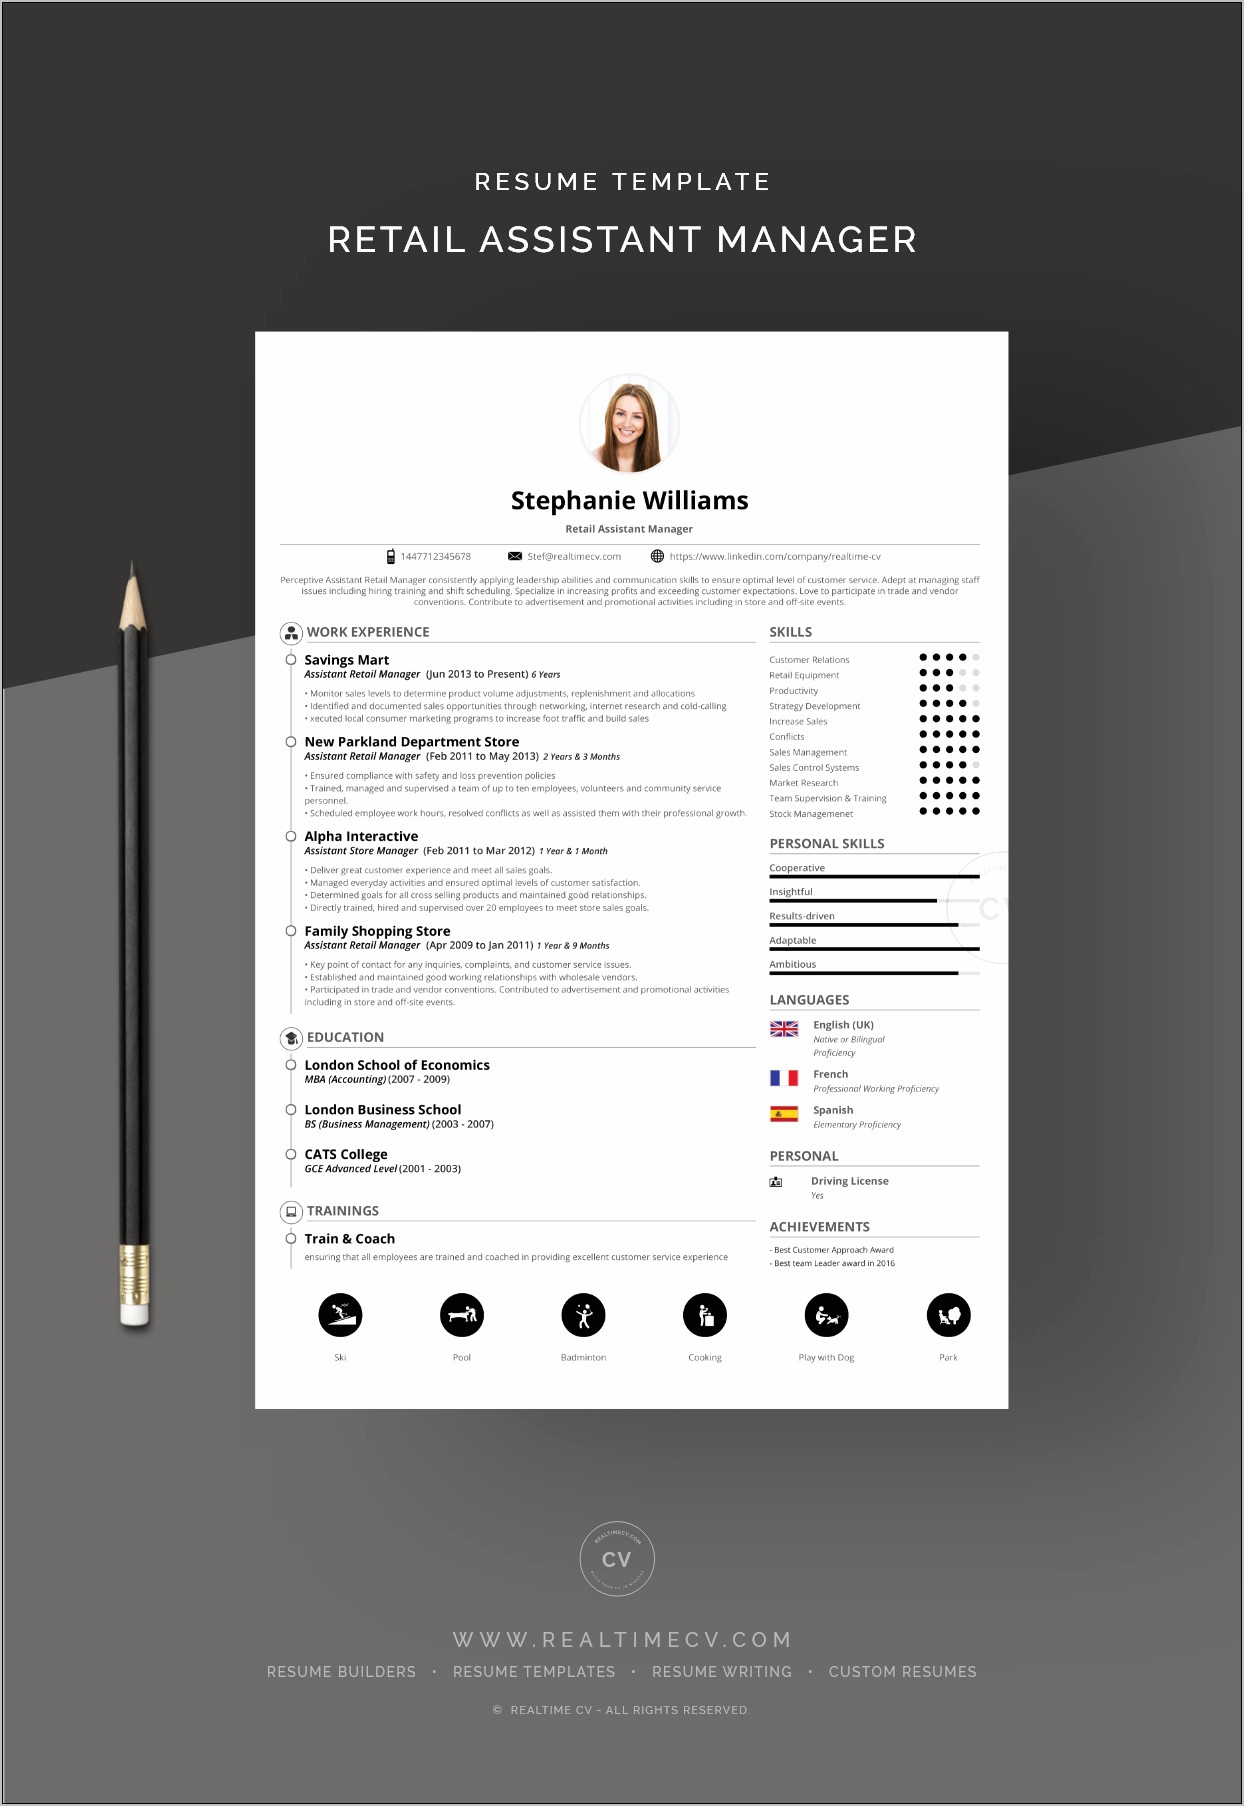 Resume For Retail Assistant Manager Samples